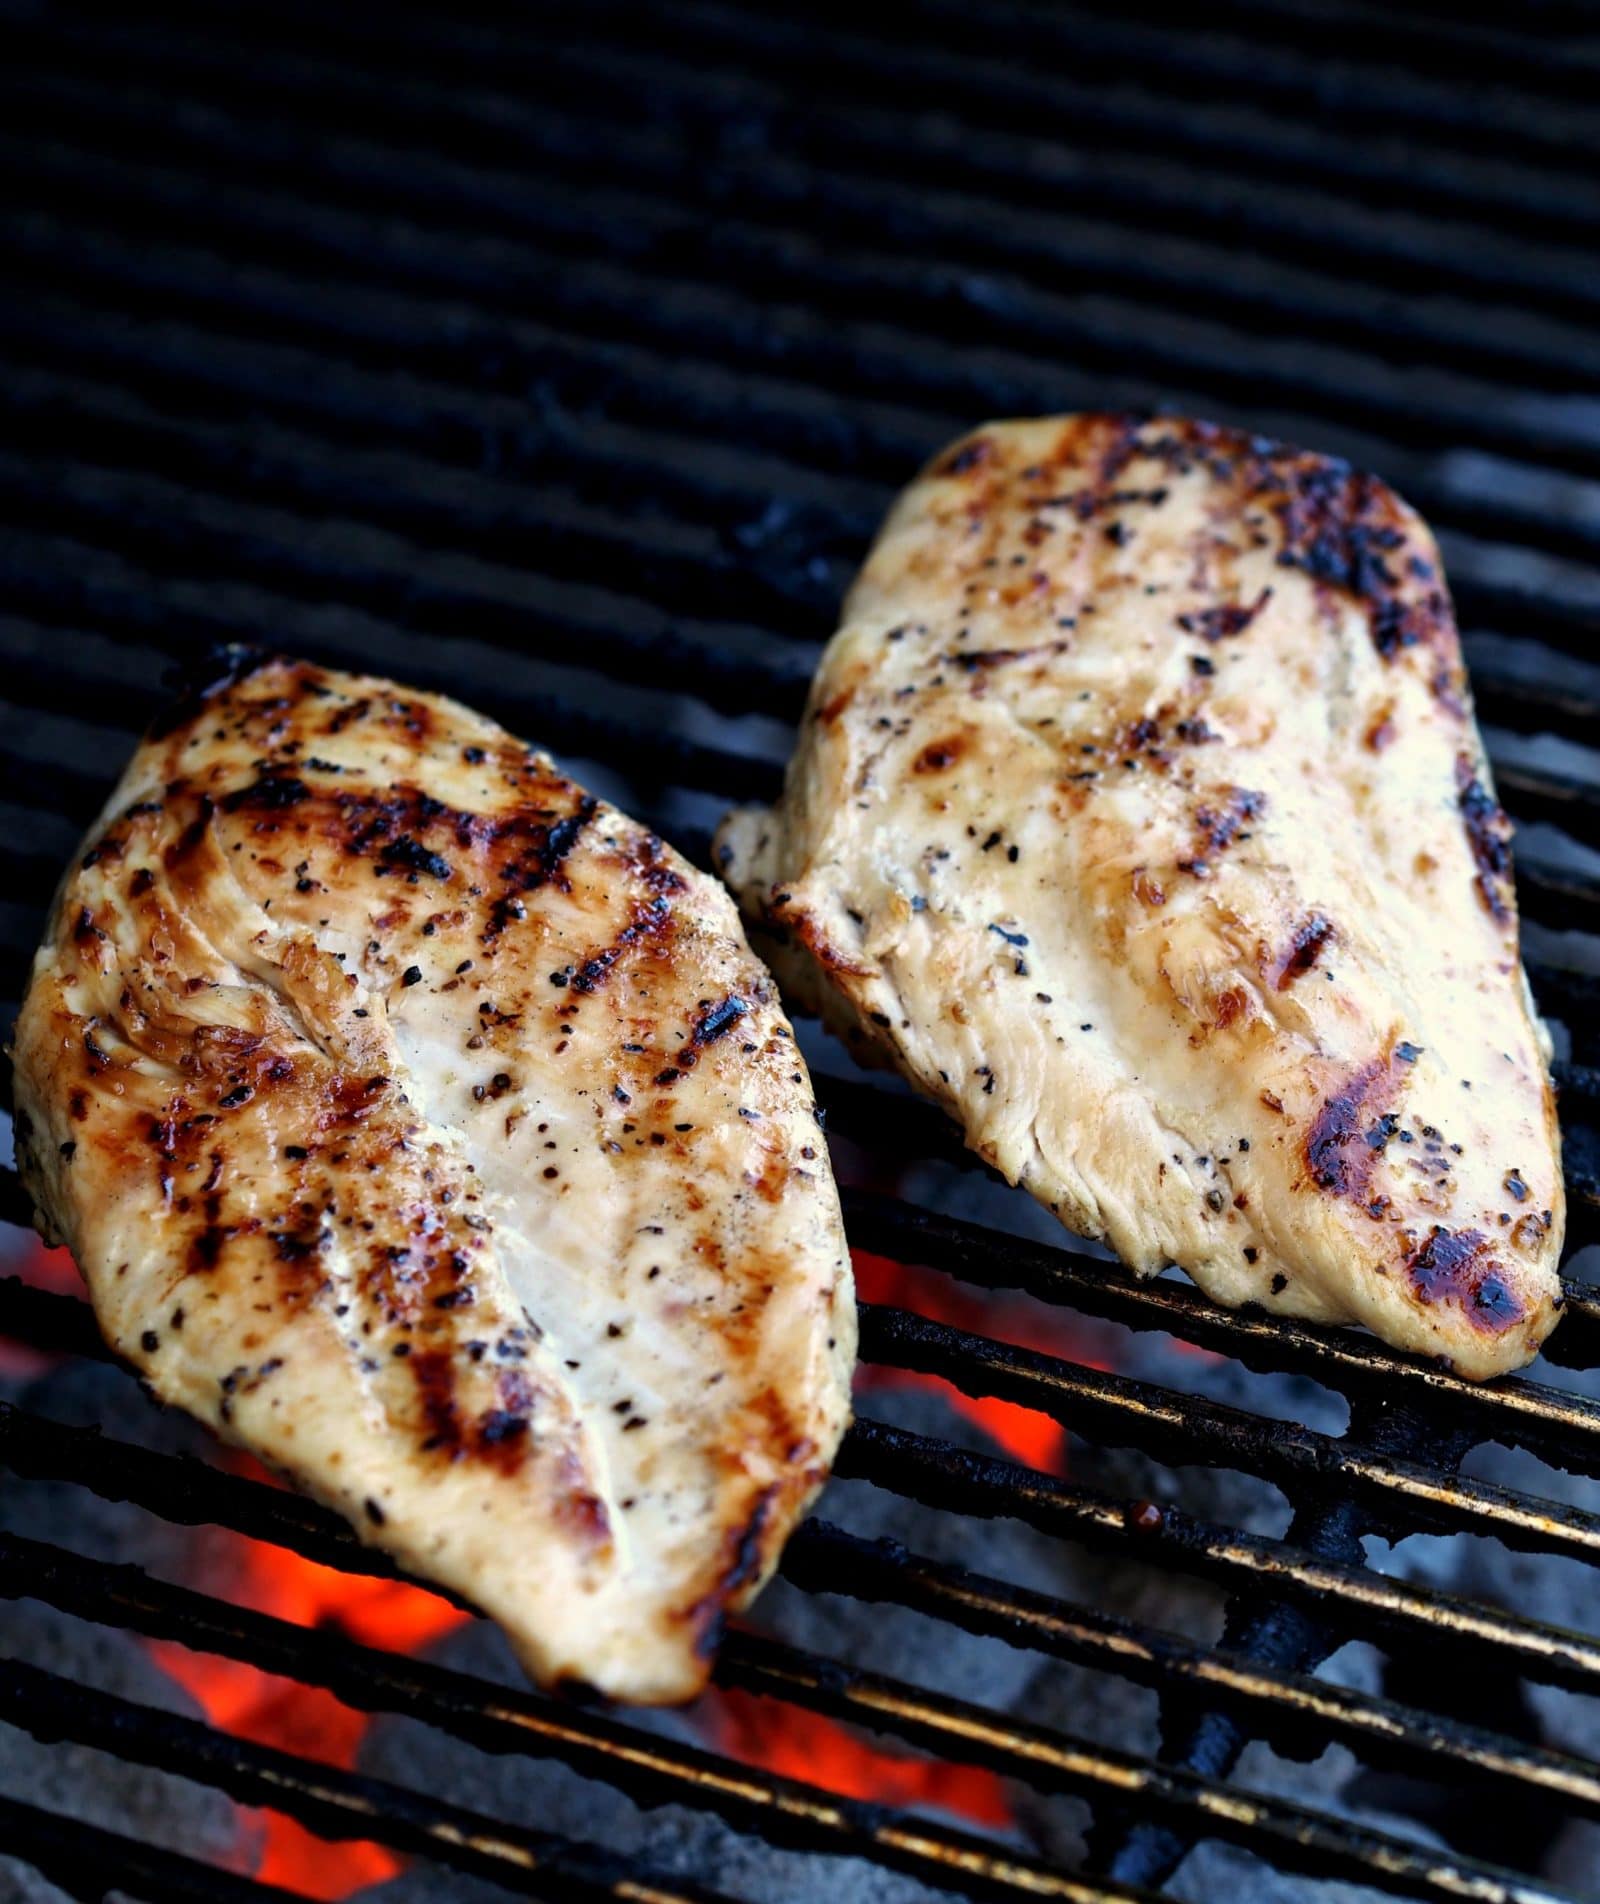 Perfect Skinless Boneless Grilled Chicken. Tenderized in buttermilk then grilled, these chicken breasts are tender, juicy, smoky, full of flavor & perfect. Simply Sated